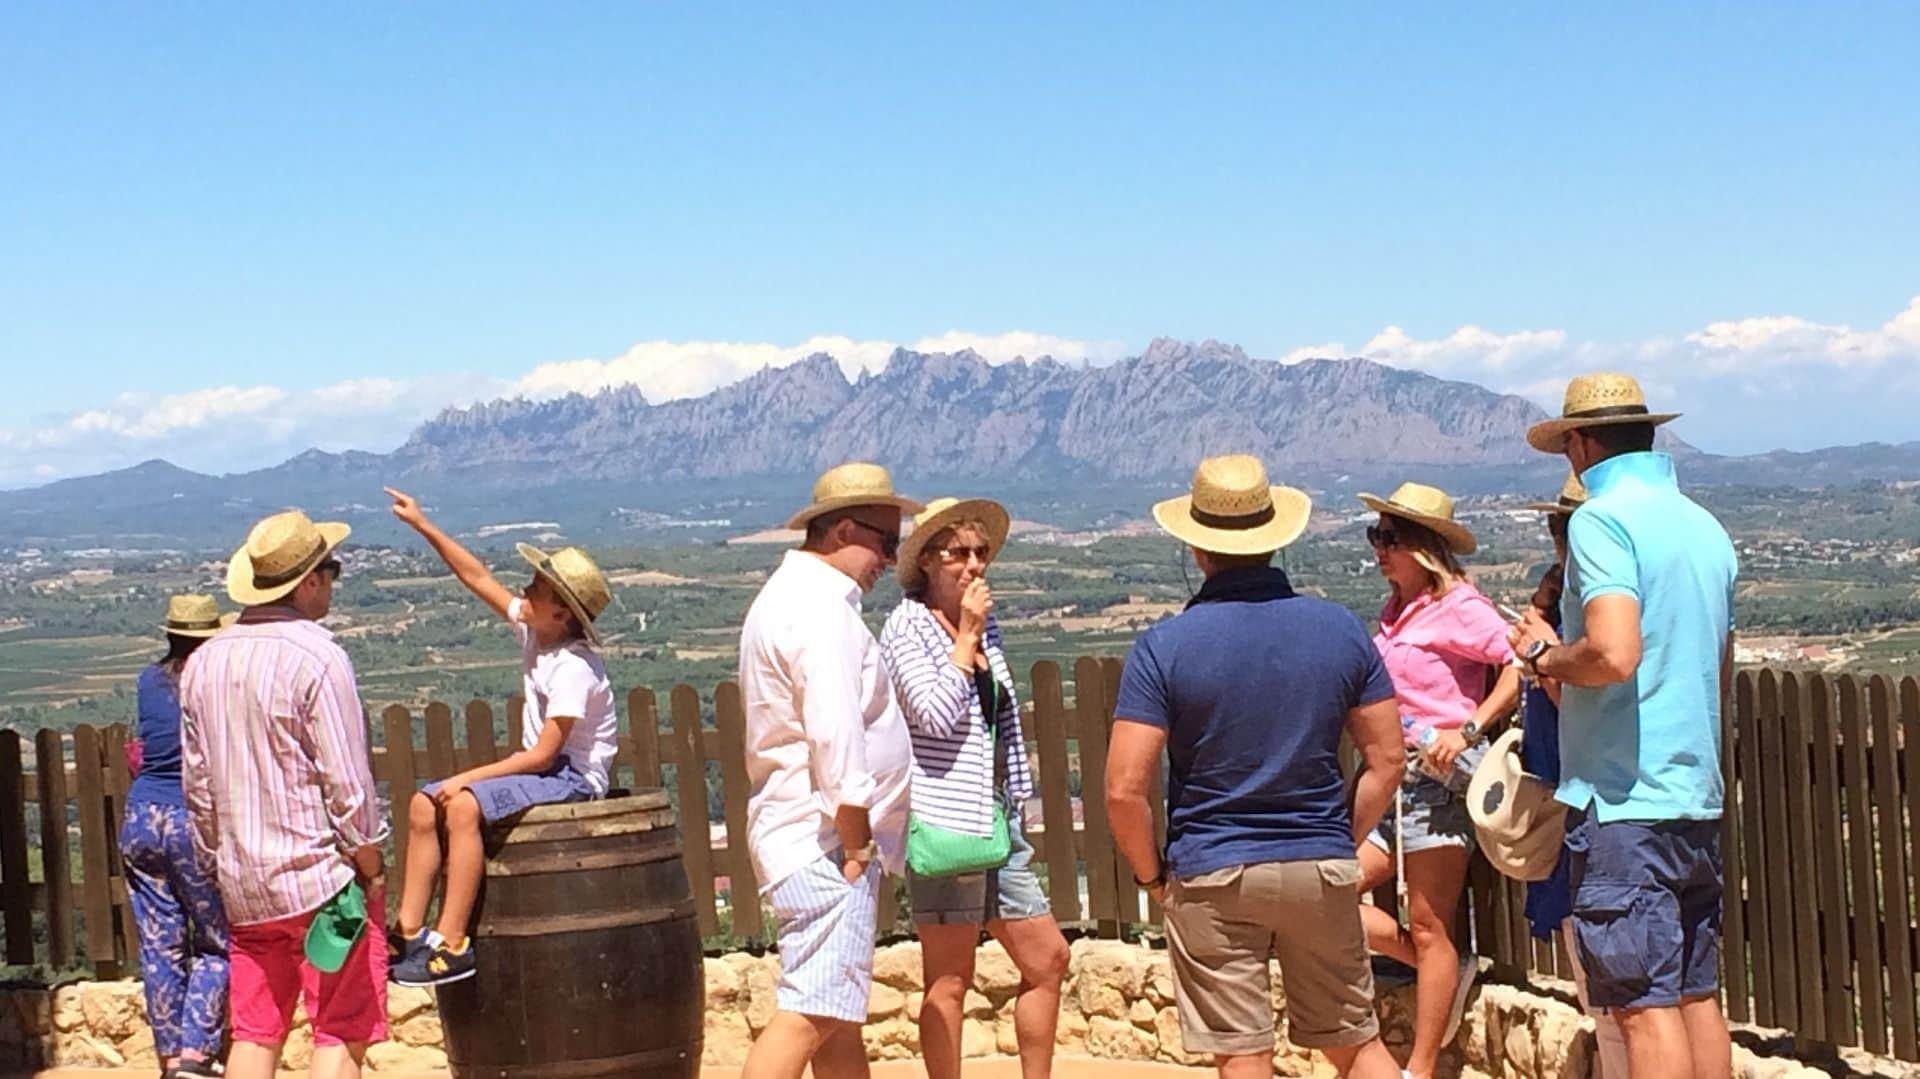 Montserrat Monastery Visit with Wine and Cava in Penedés Private Day Tour - In out Barcelona Tours